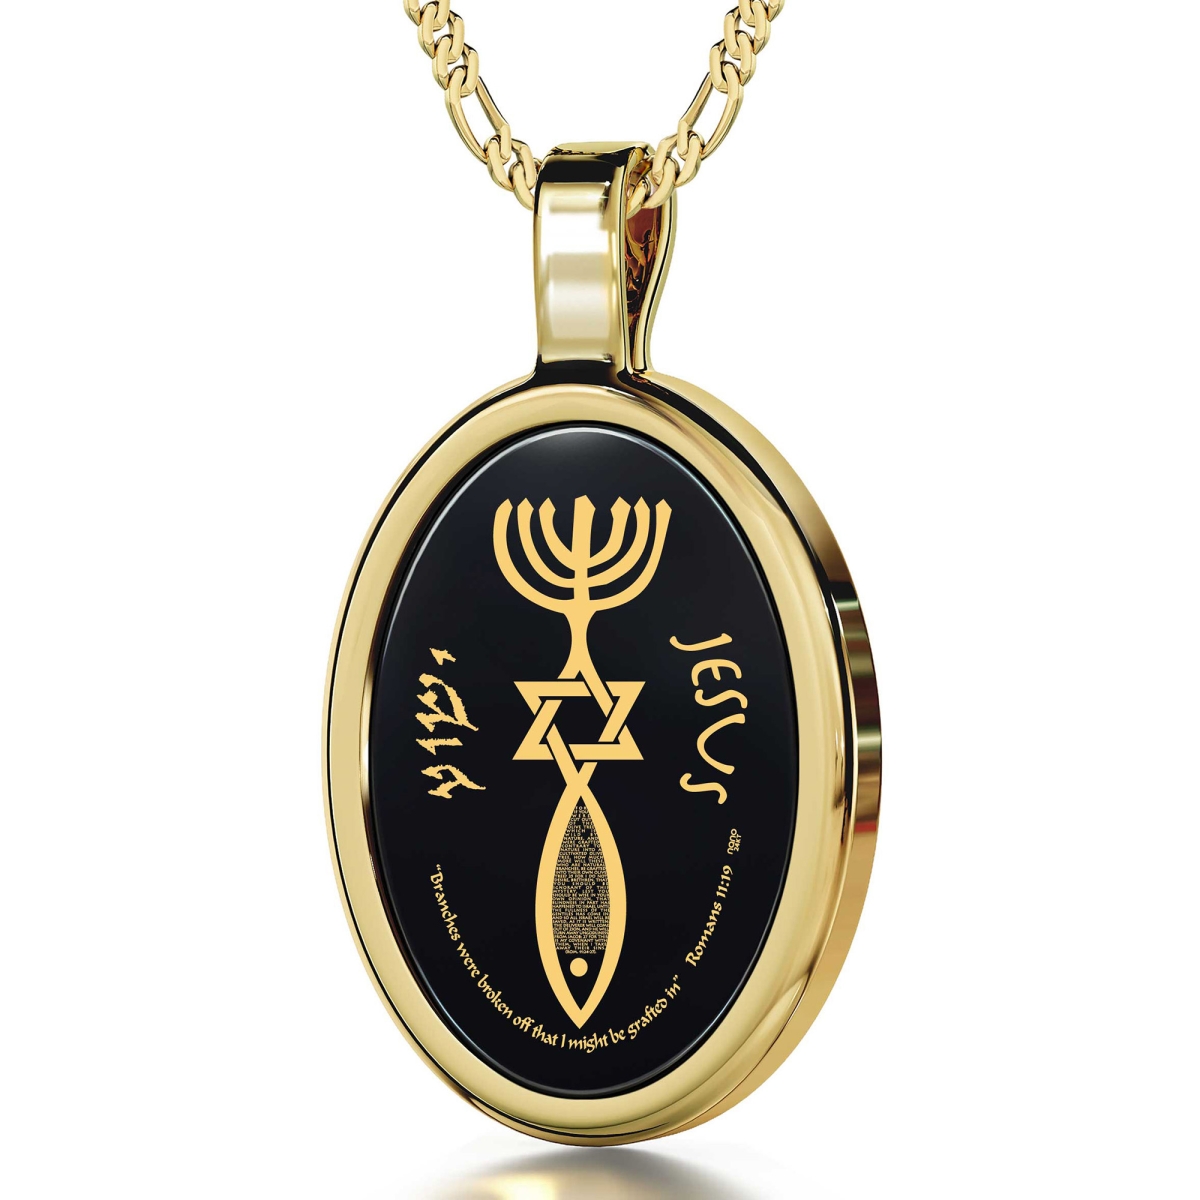 Nano 24K Gold Plated and Onyx Framed Oval Grafted-In Necklace with 24K Gold Micro-Inscription - 1